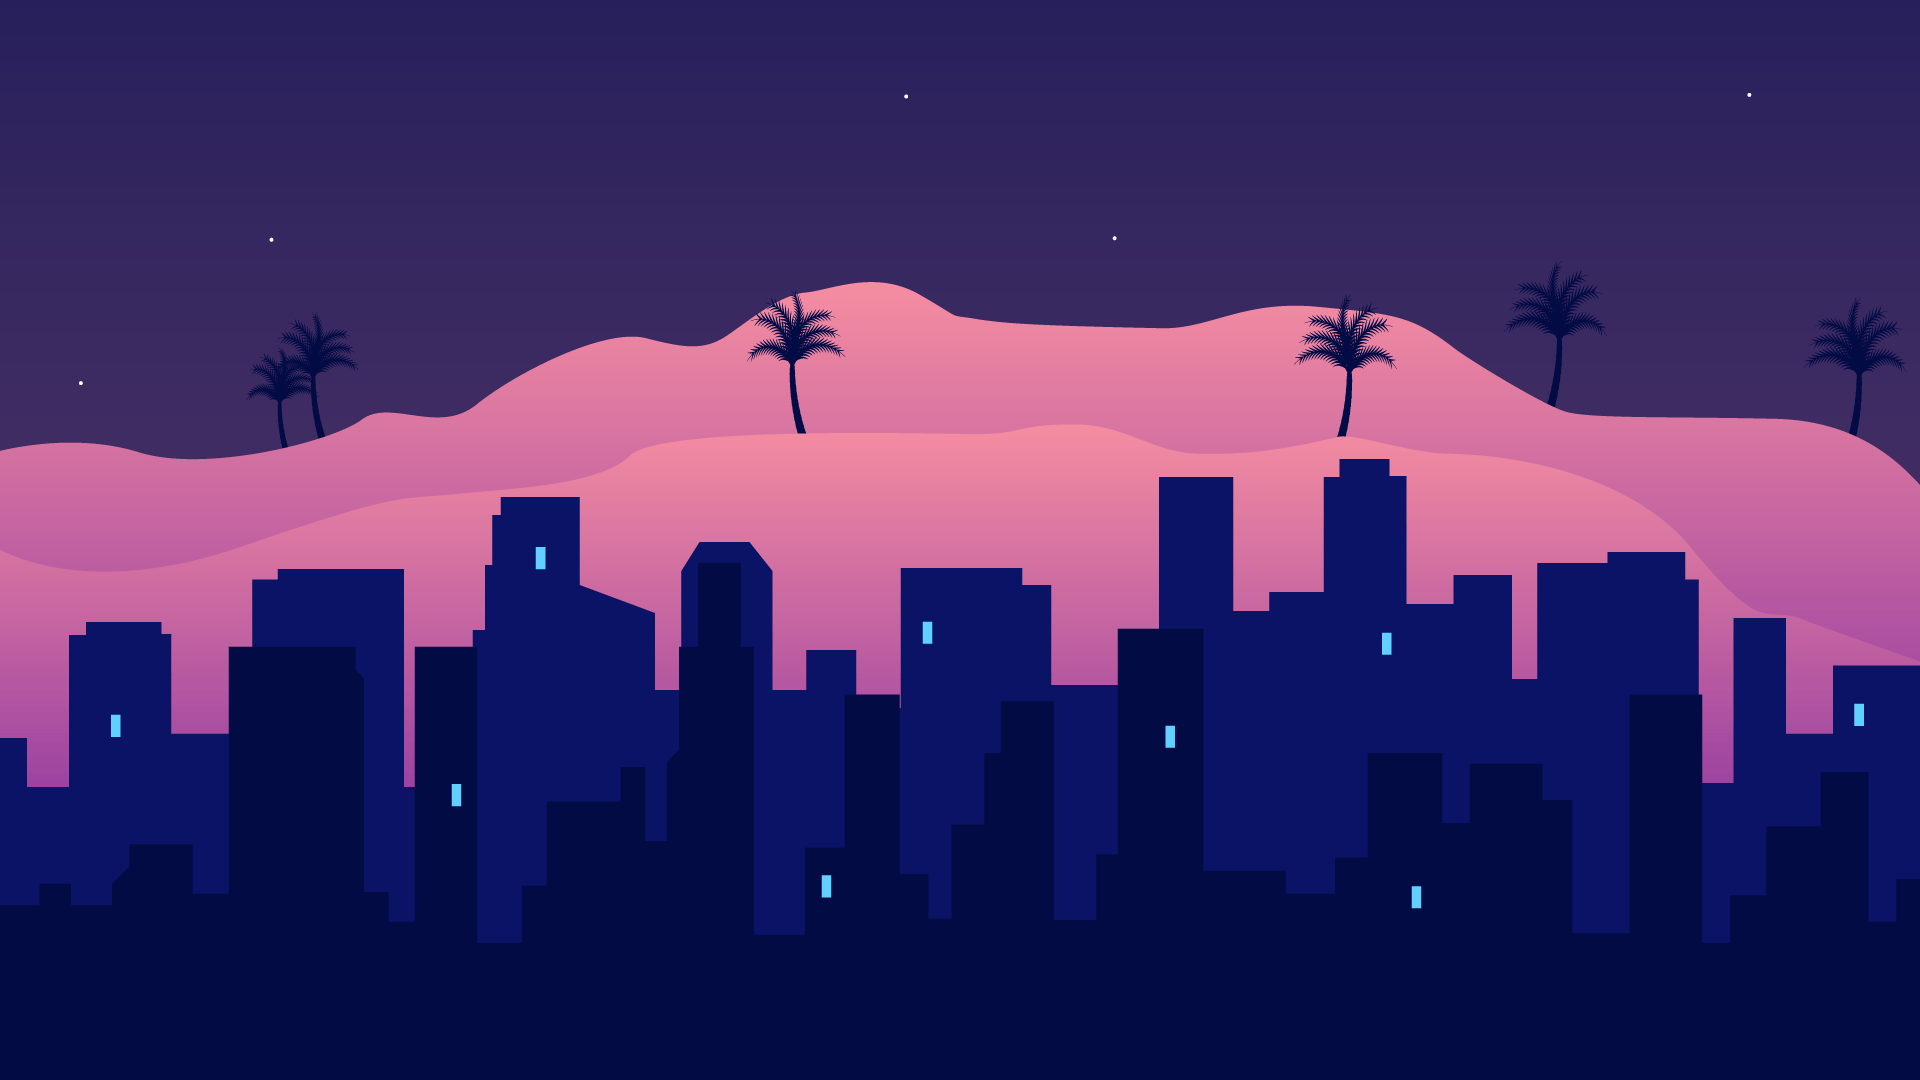 A city skyline with palm trees in the foreground - Chromebook